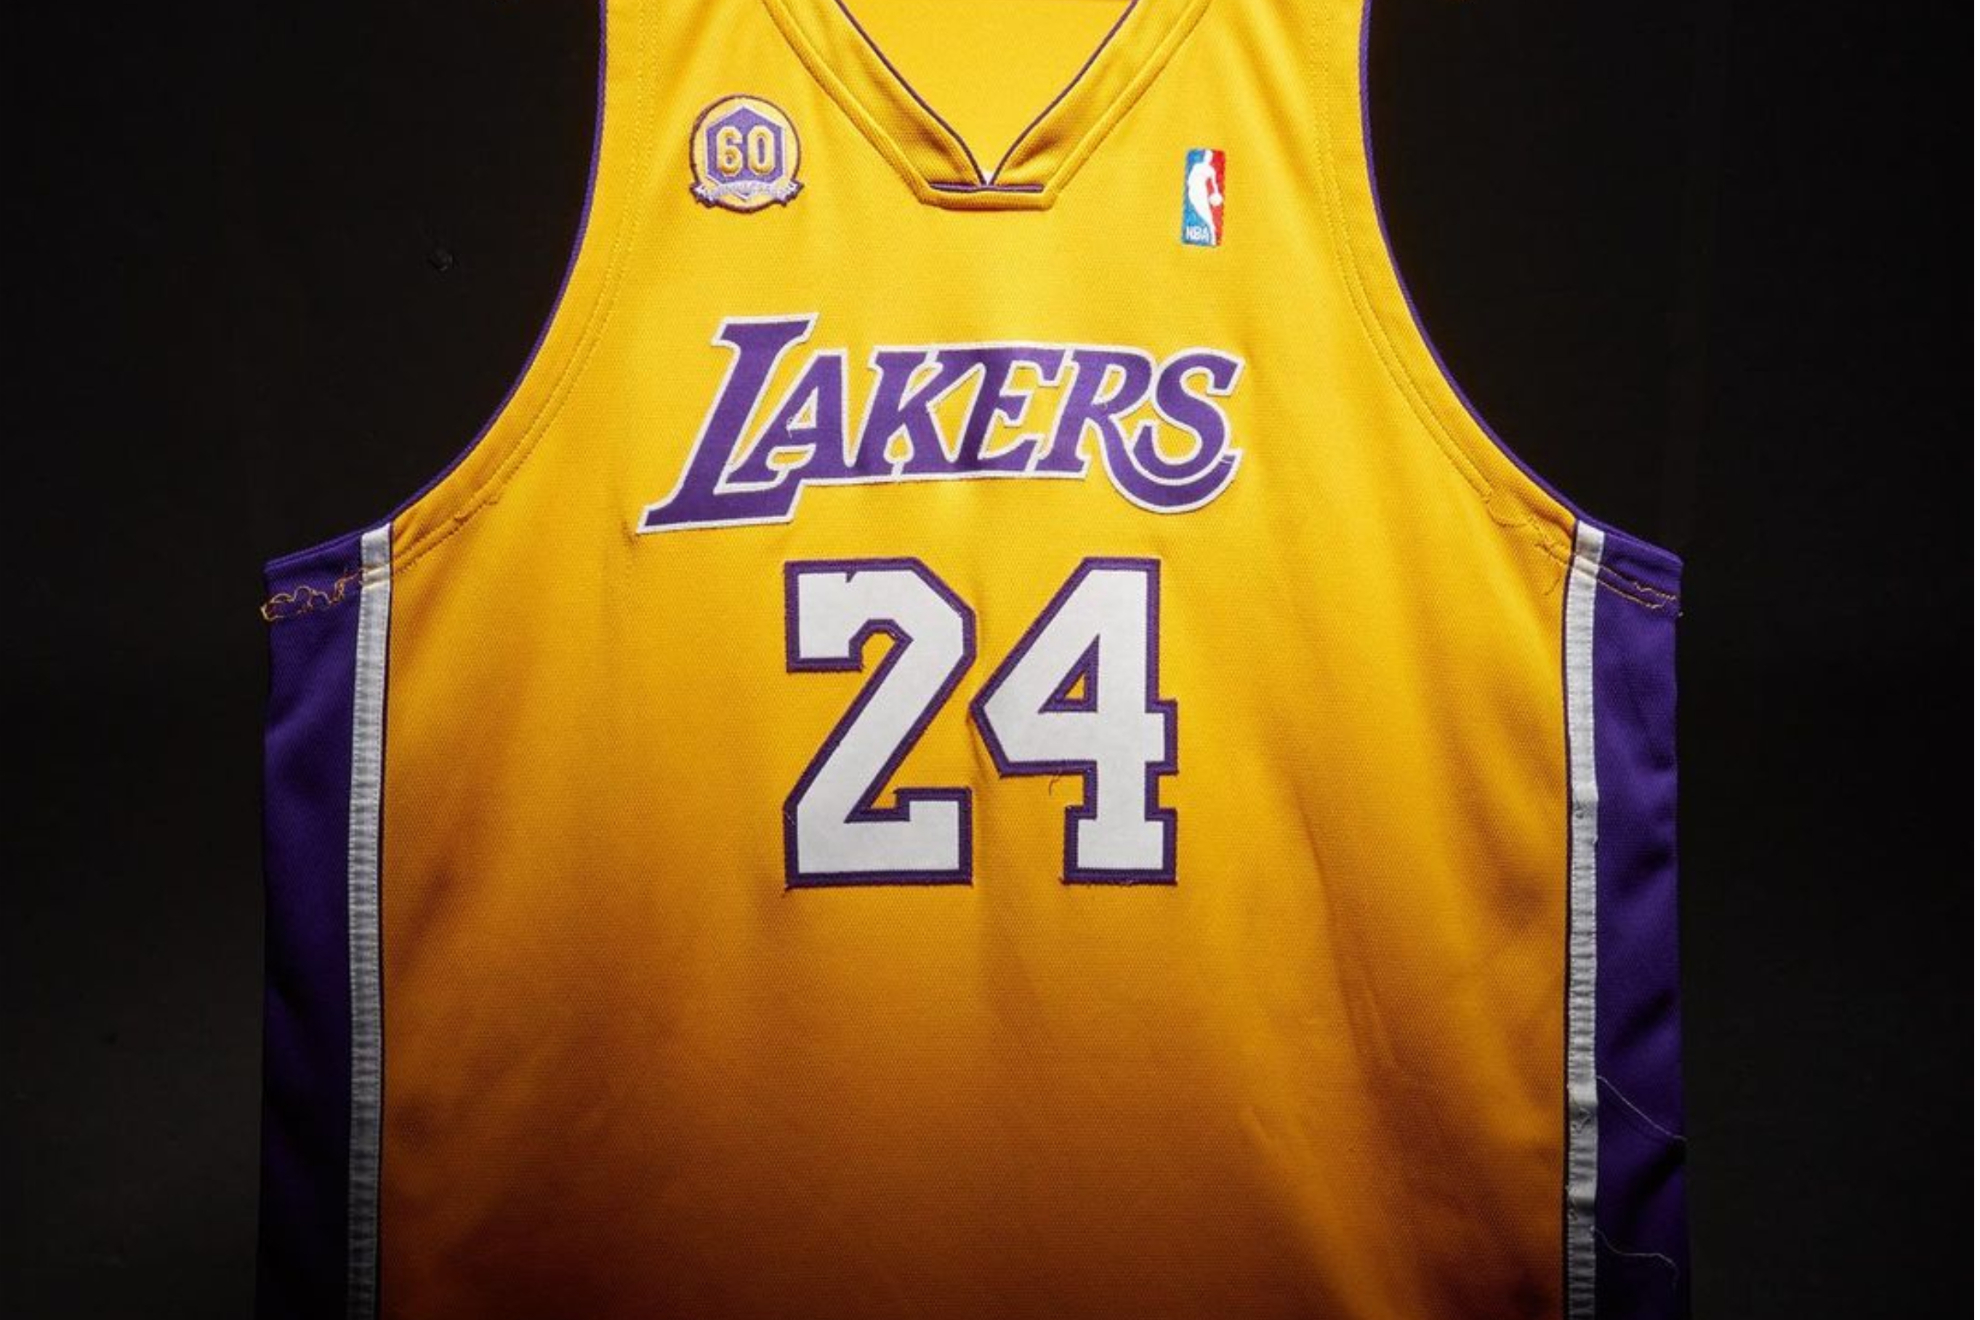 bryant jersey lakers